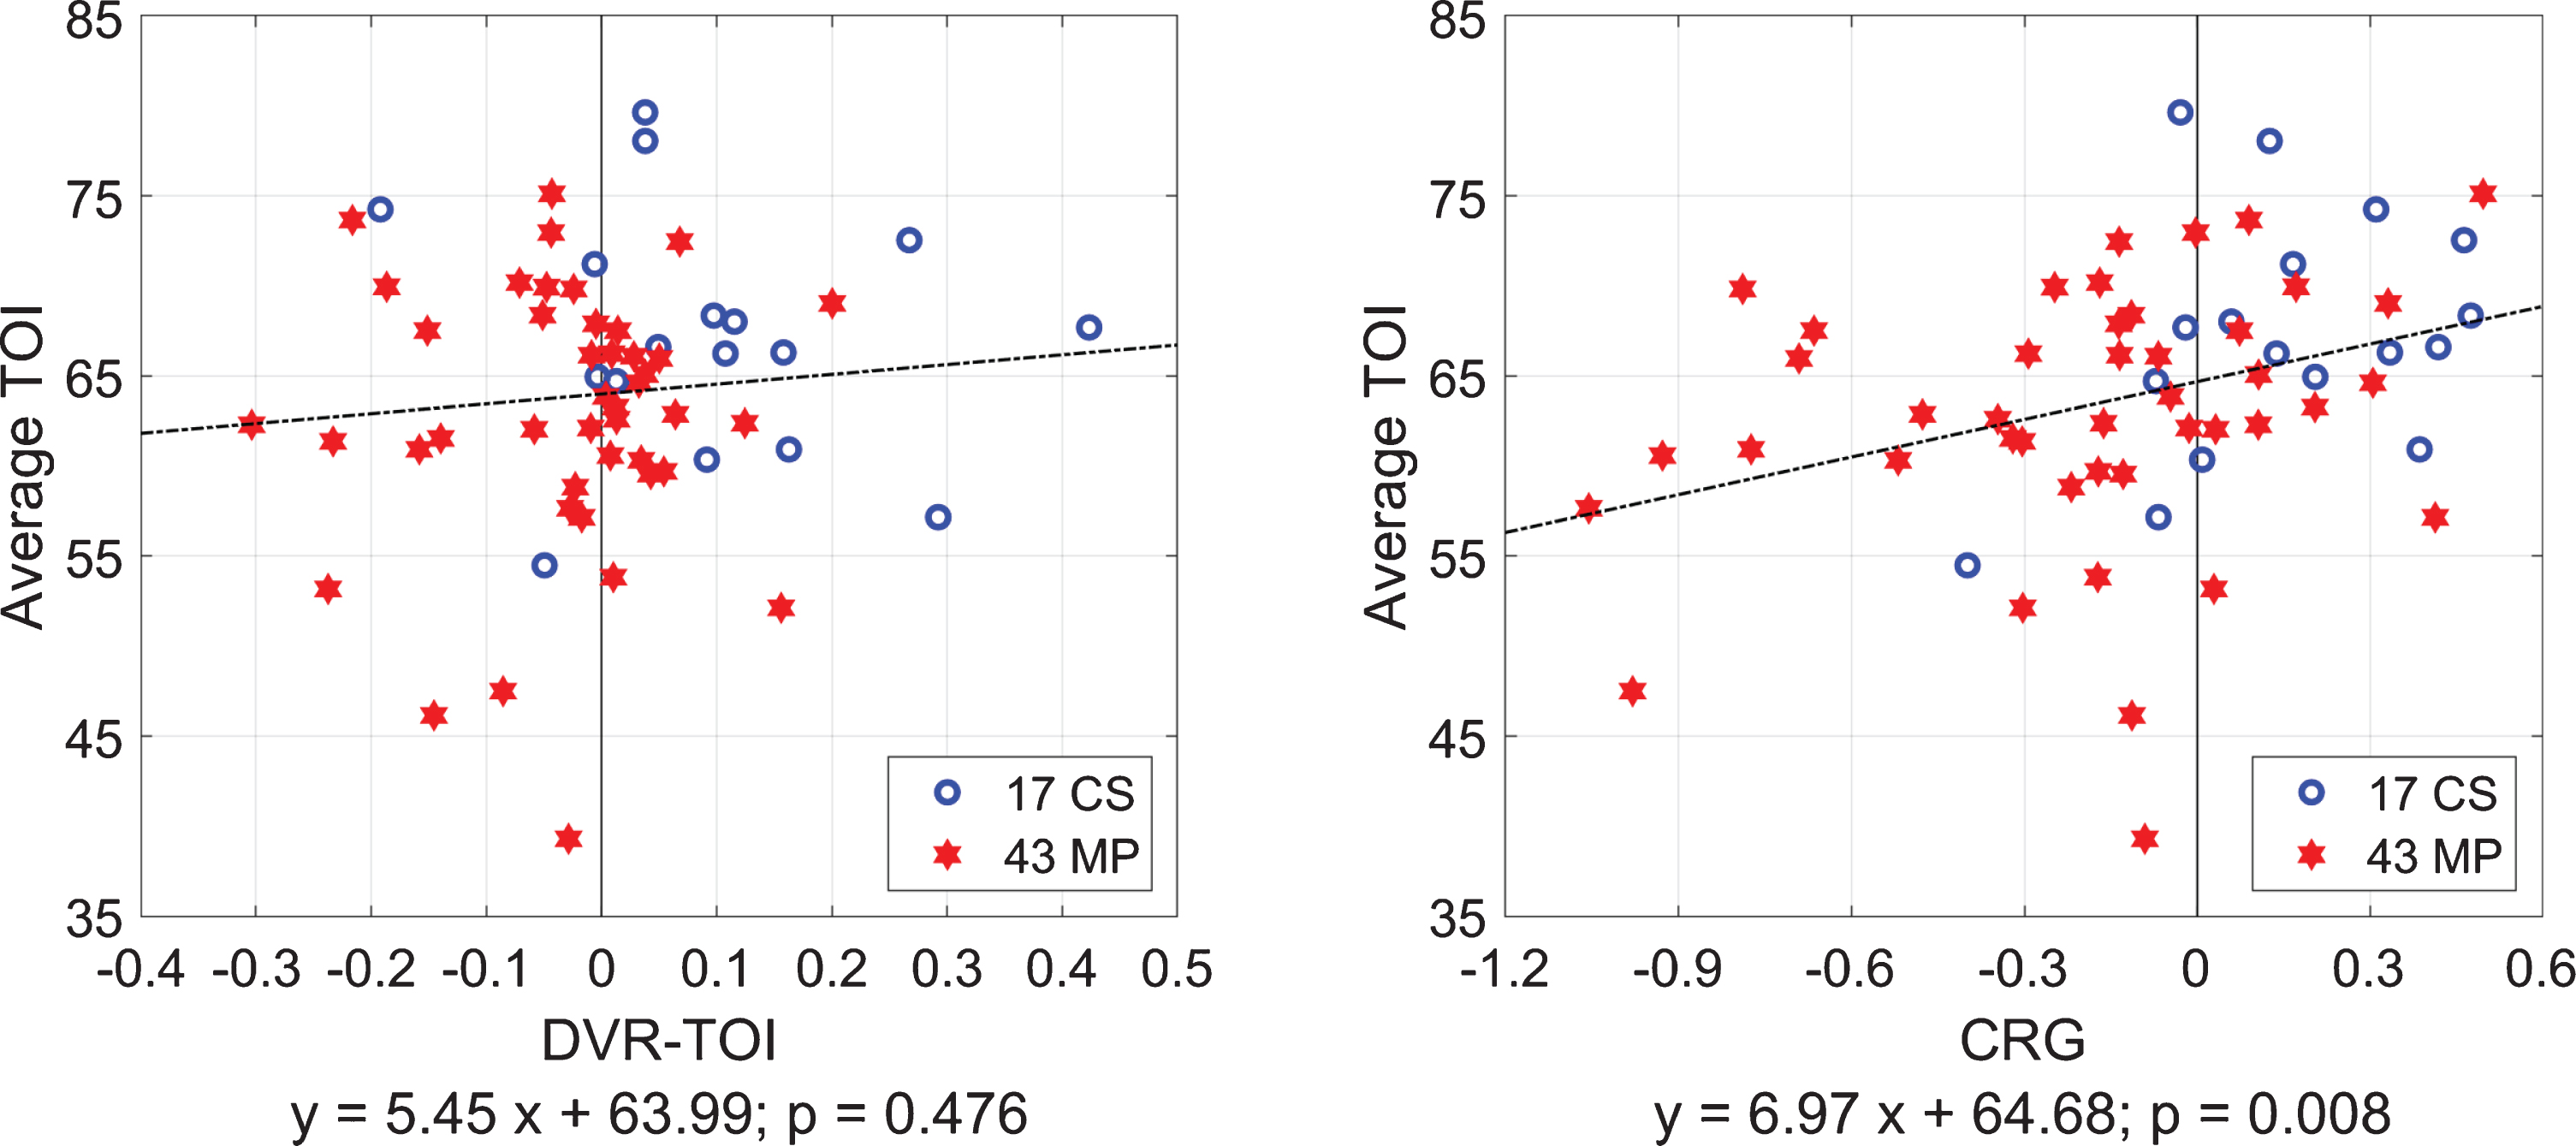 Scatter-plots and regression lines for Average-TOI values versus CRG indices (right) or DVR-TOI indices (left) for 17 CS (blue circles) and 43 MP (red stars) taken together. The Average-TOI values correlate strongly with the CRG indices but not with the DVR-TOI indices.